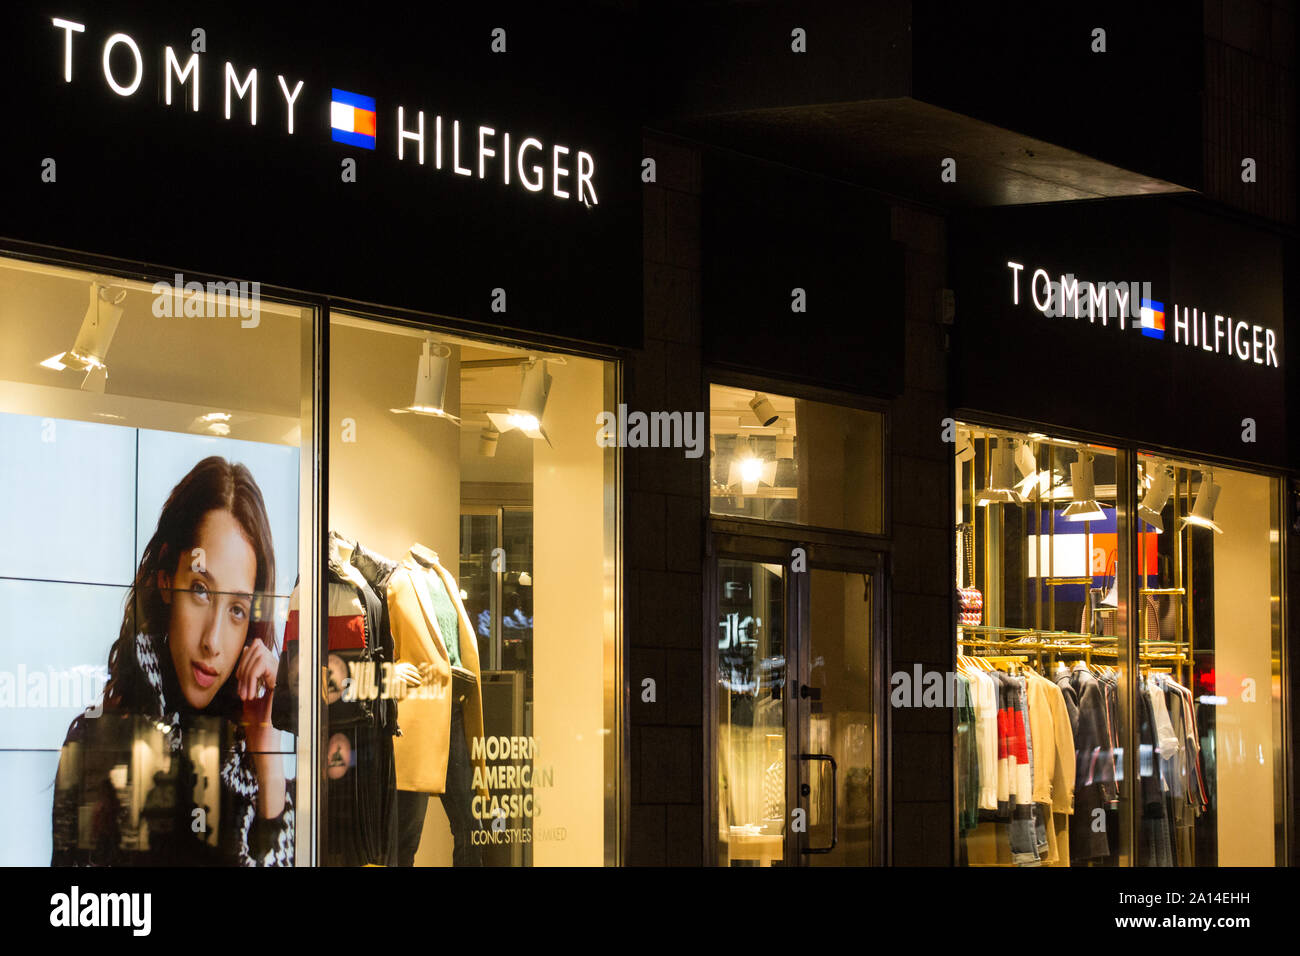 Tommy Hilfiger Manufacturing Country | seeds.yonsei.ac.kr